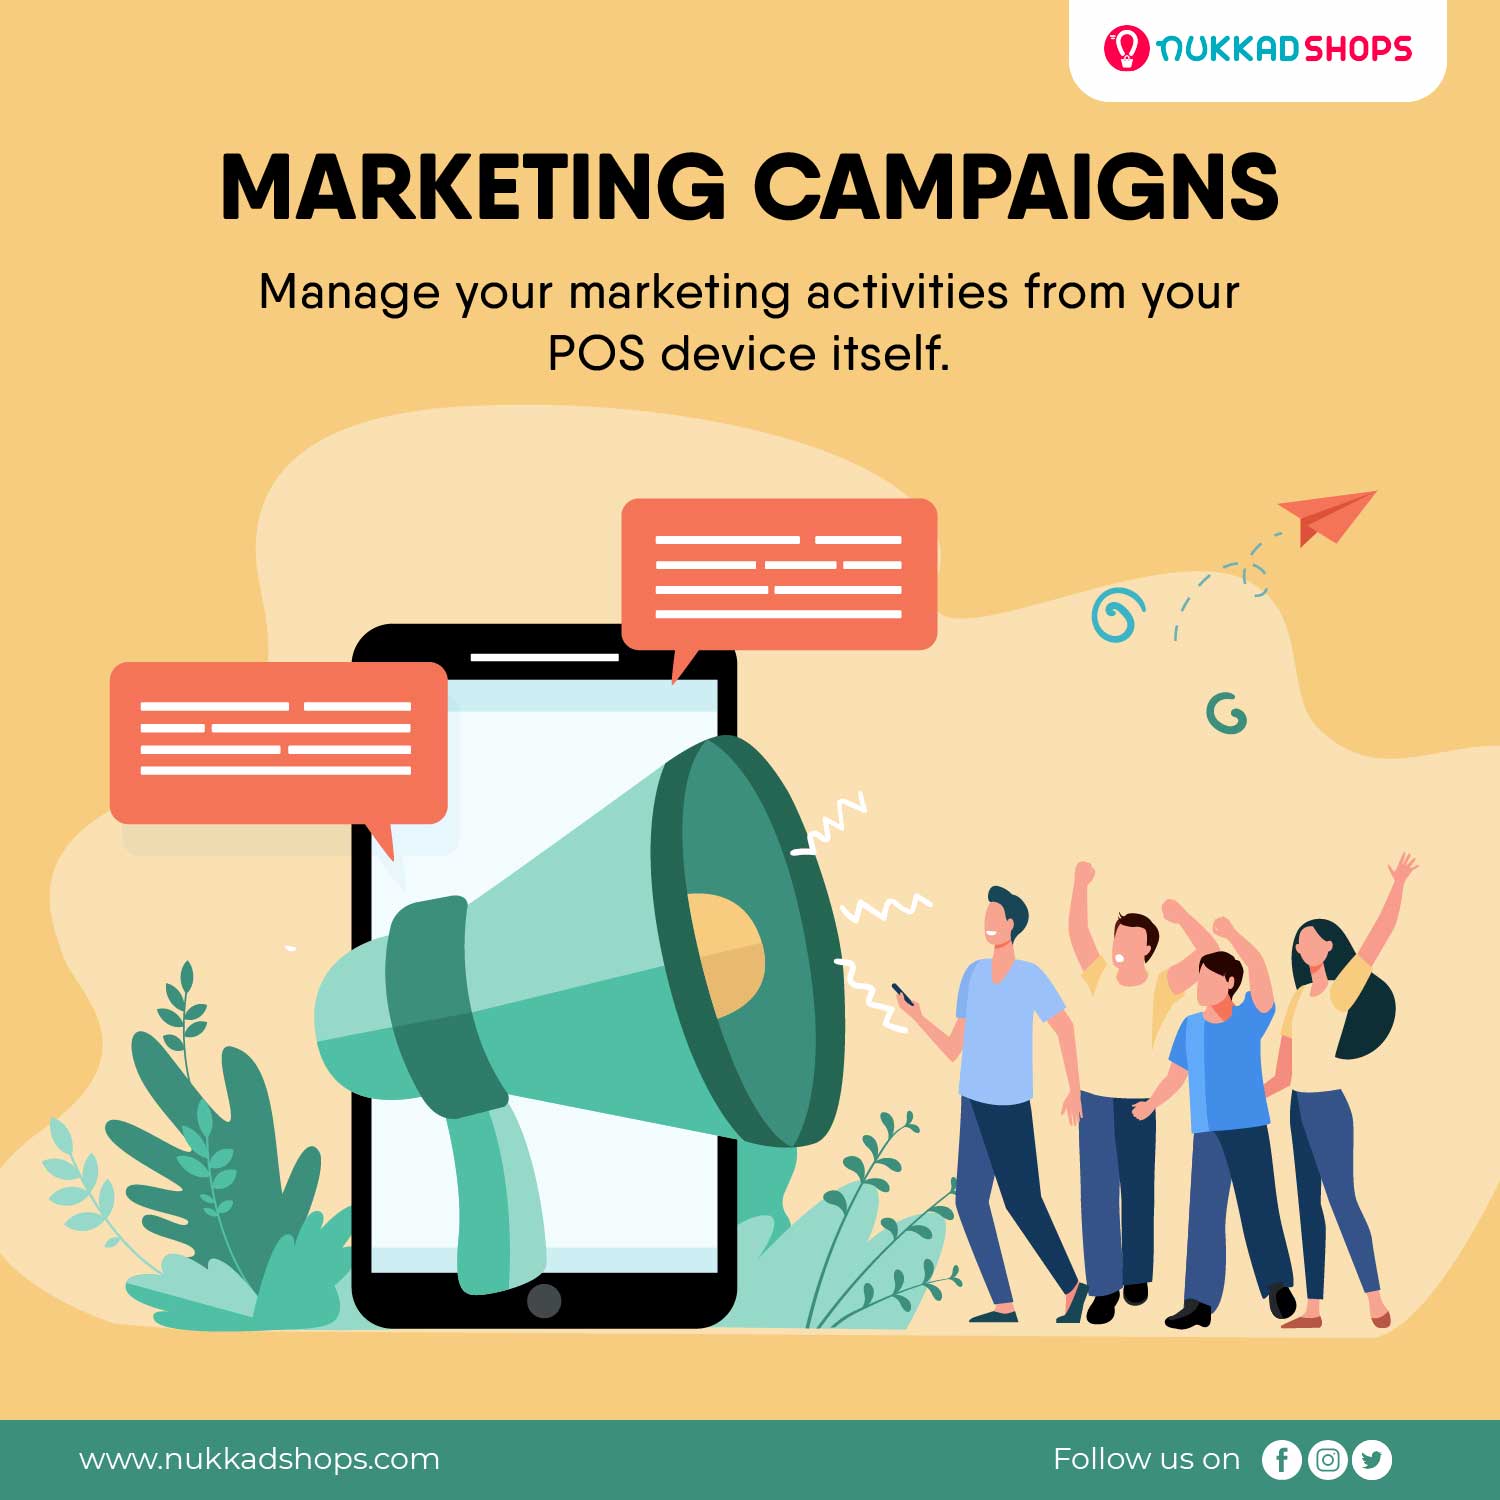 You are currently viewing How Nukkadshops can help you in Managing your Marketing Campaigns